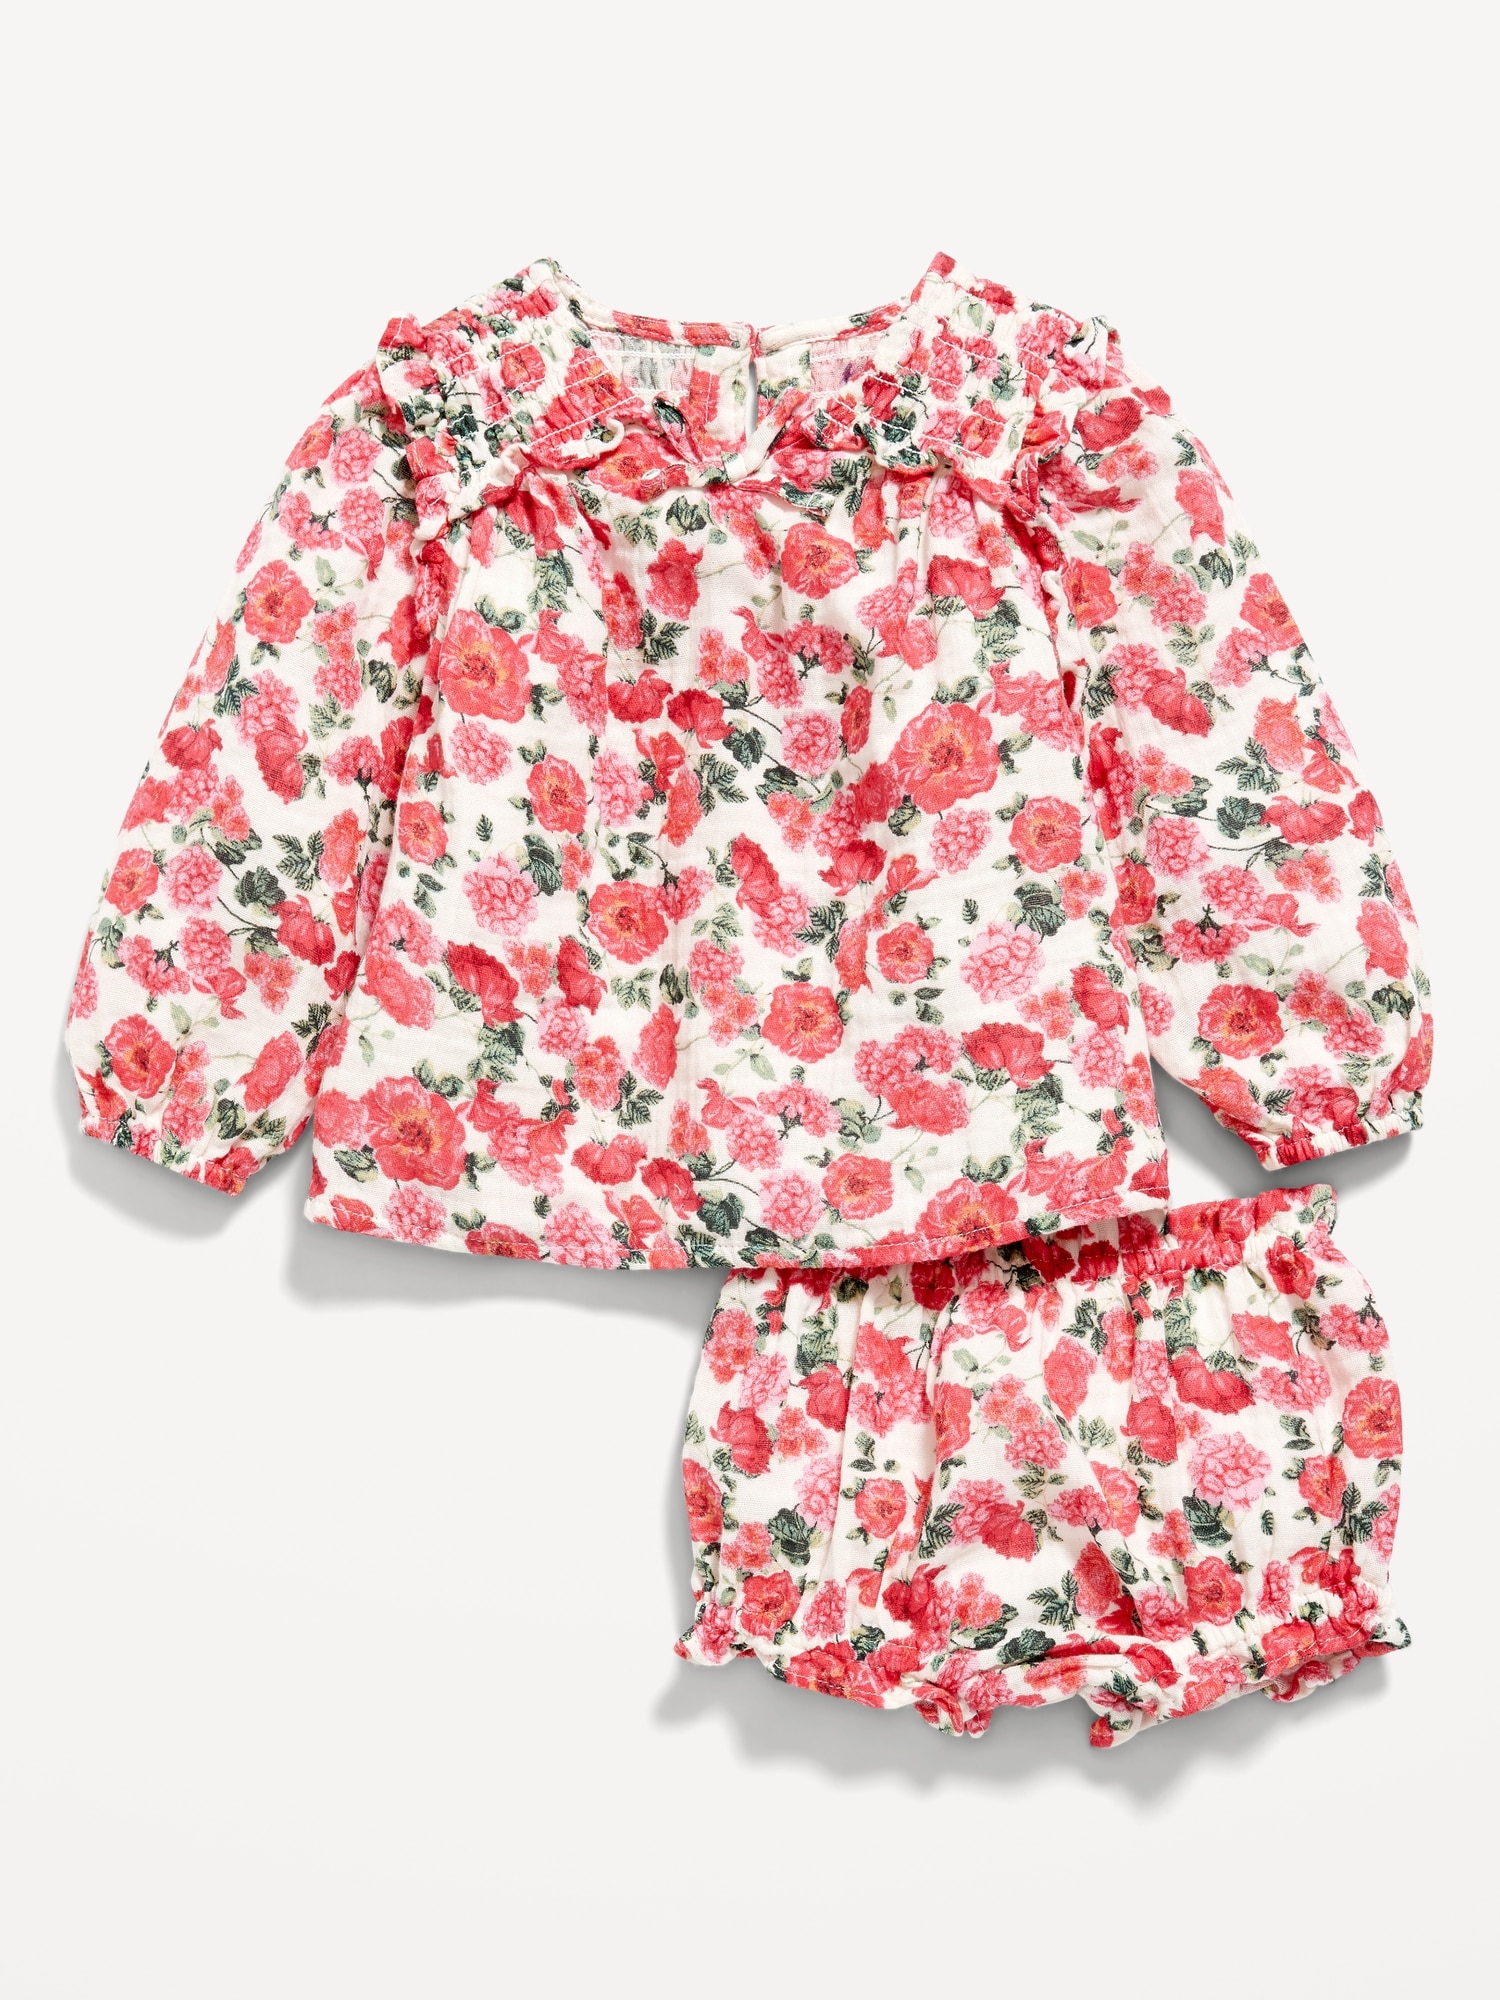 Printed Long-Sleeve Smocked Top & Bloomer Shorts Set for Baby | Old Navy